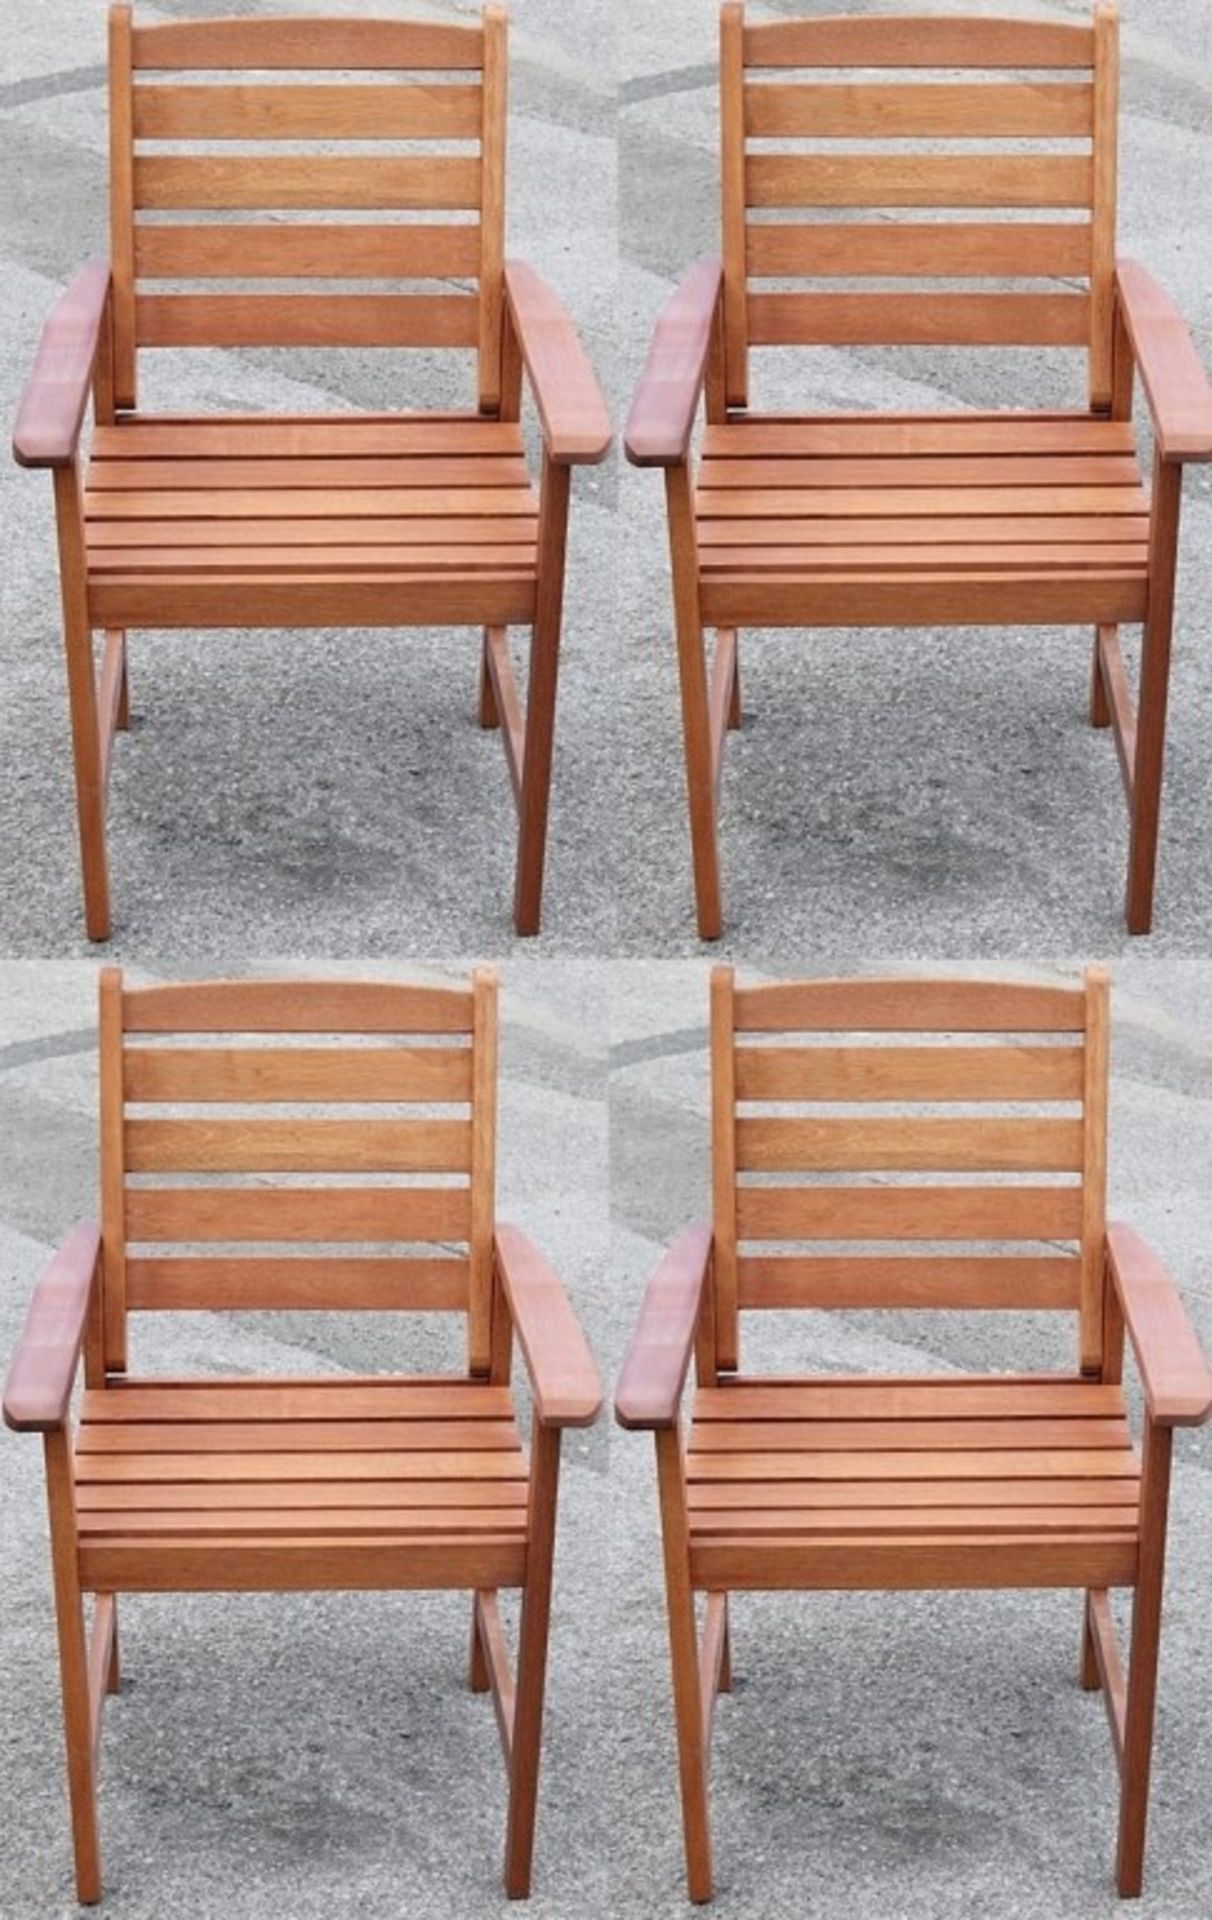 4 x Macau Armchairs - Made From Treated Meranti Hardwood - Rot and Moisture Resistant - Dimensions